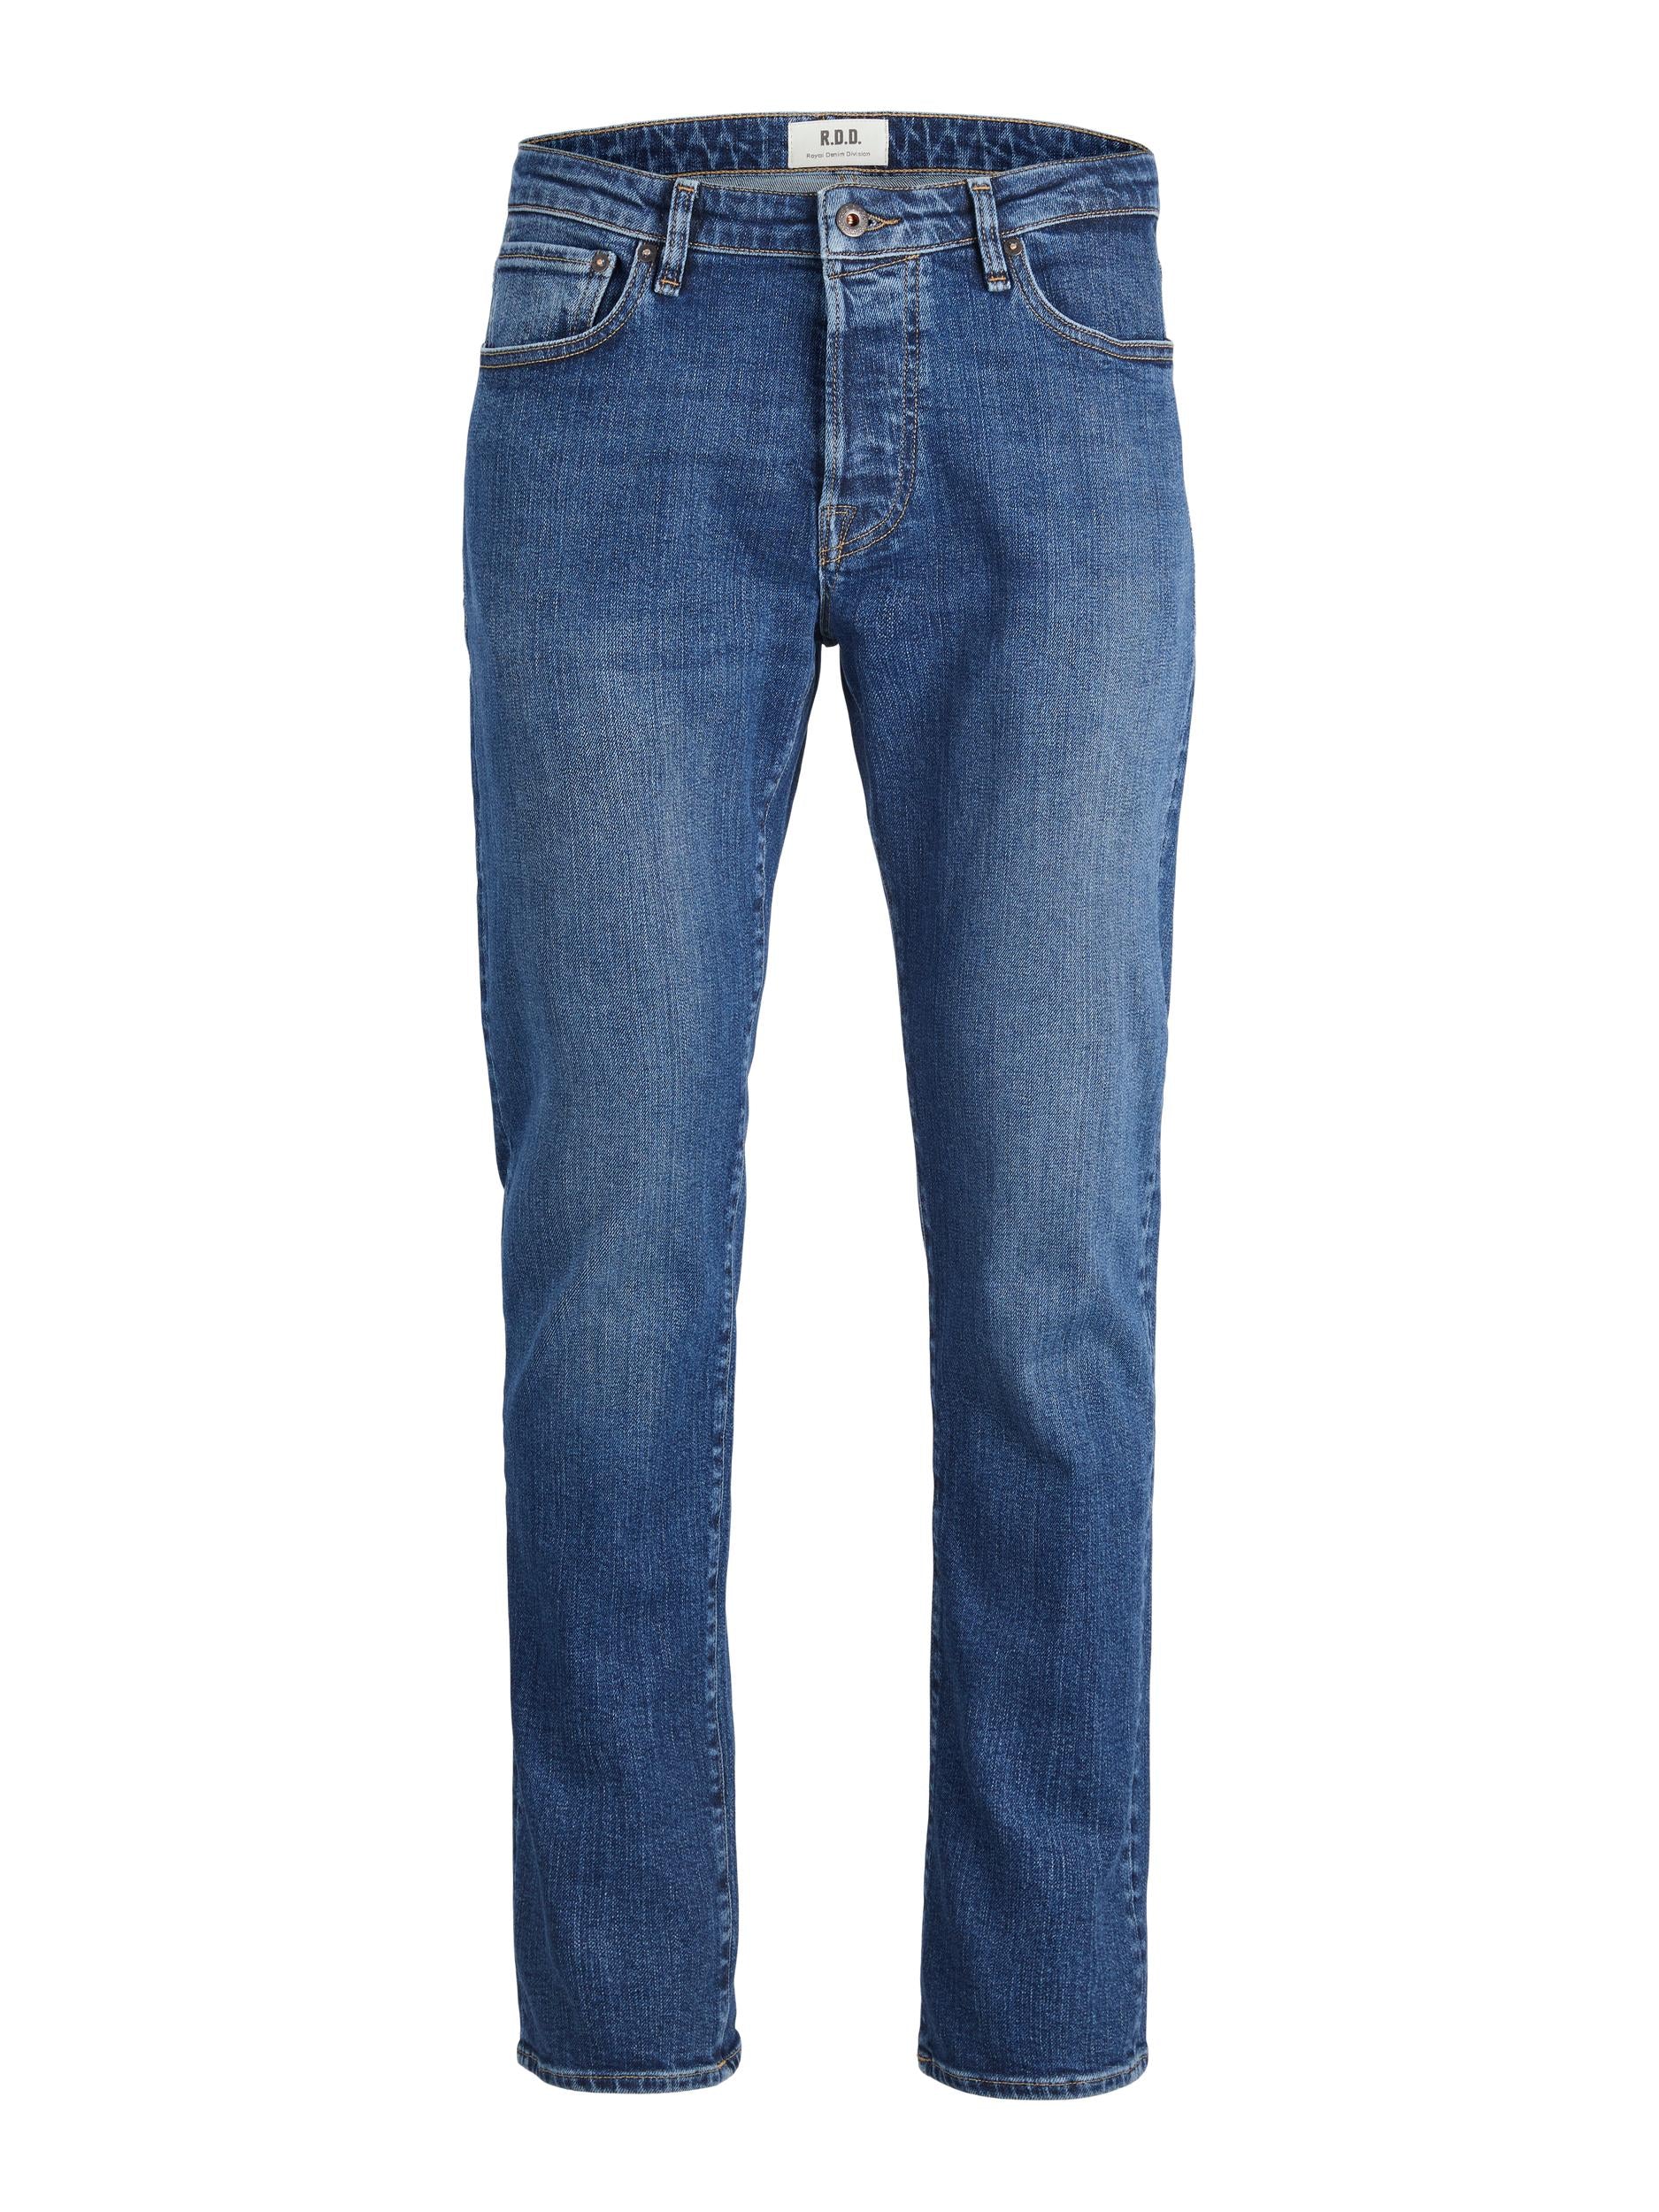 Men's Royal Comfort 811 Jeans-Ghost Front View